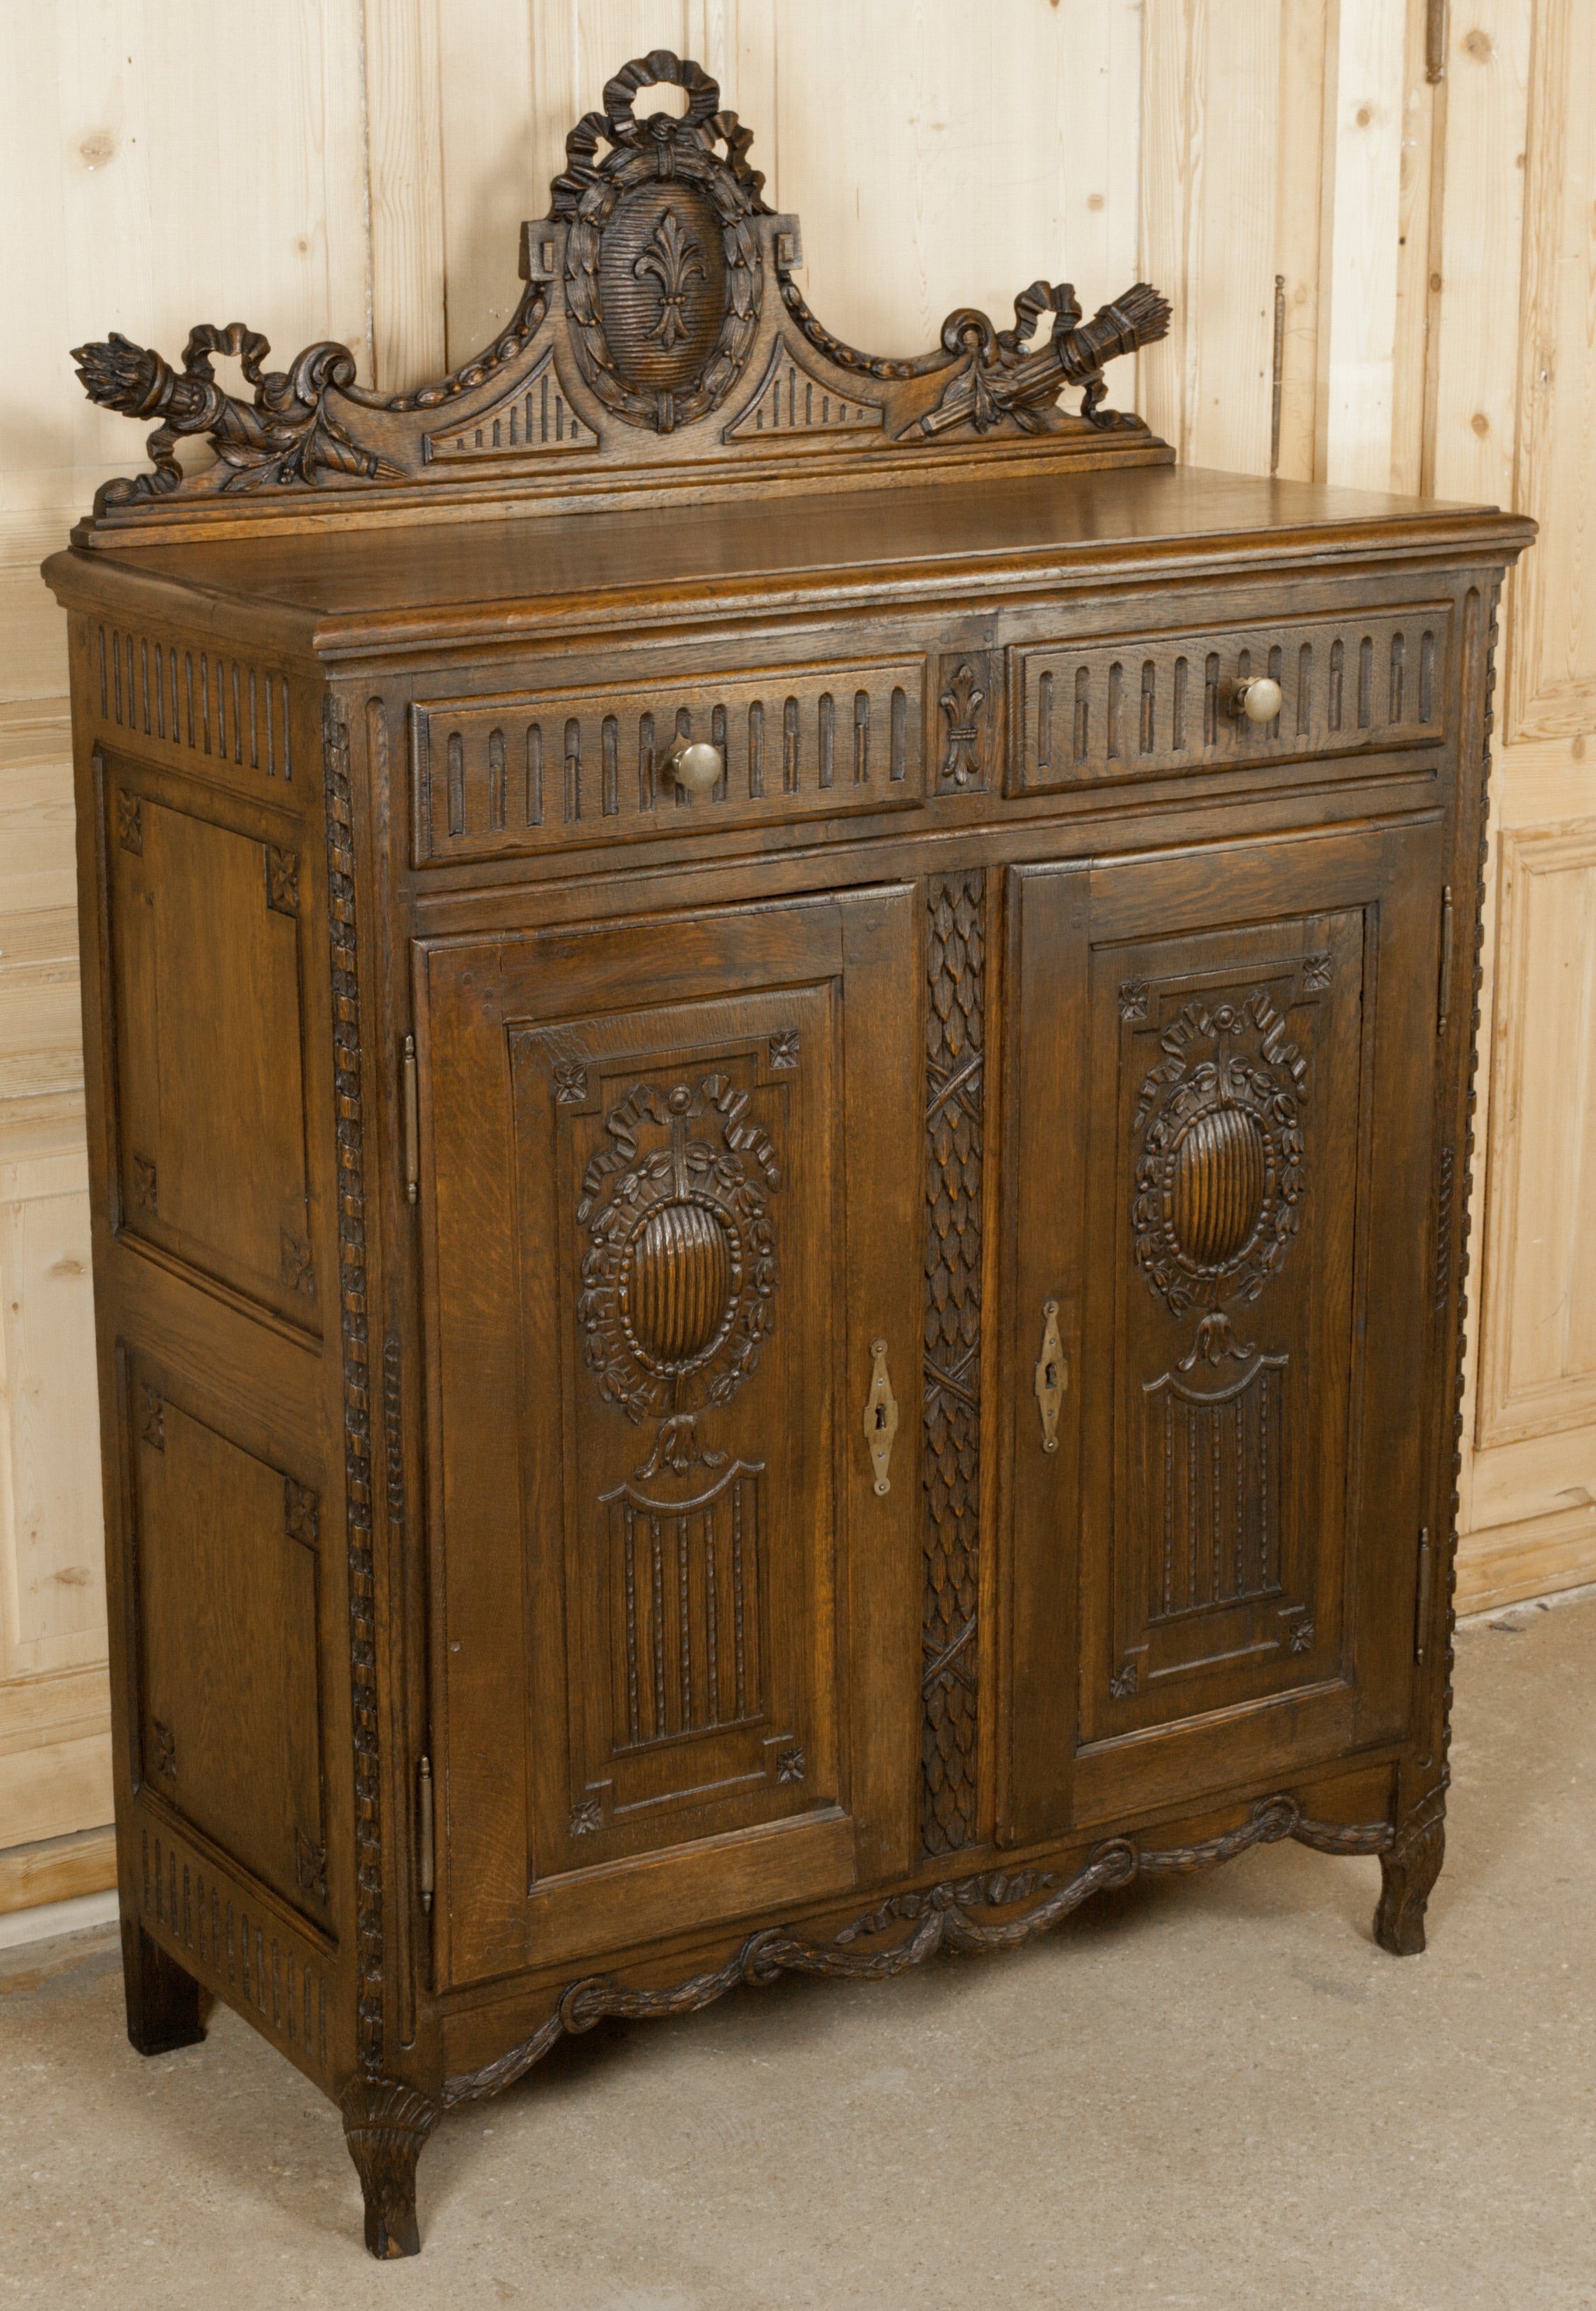 Antique Rustic French Louis XVI Cabinet